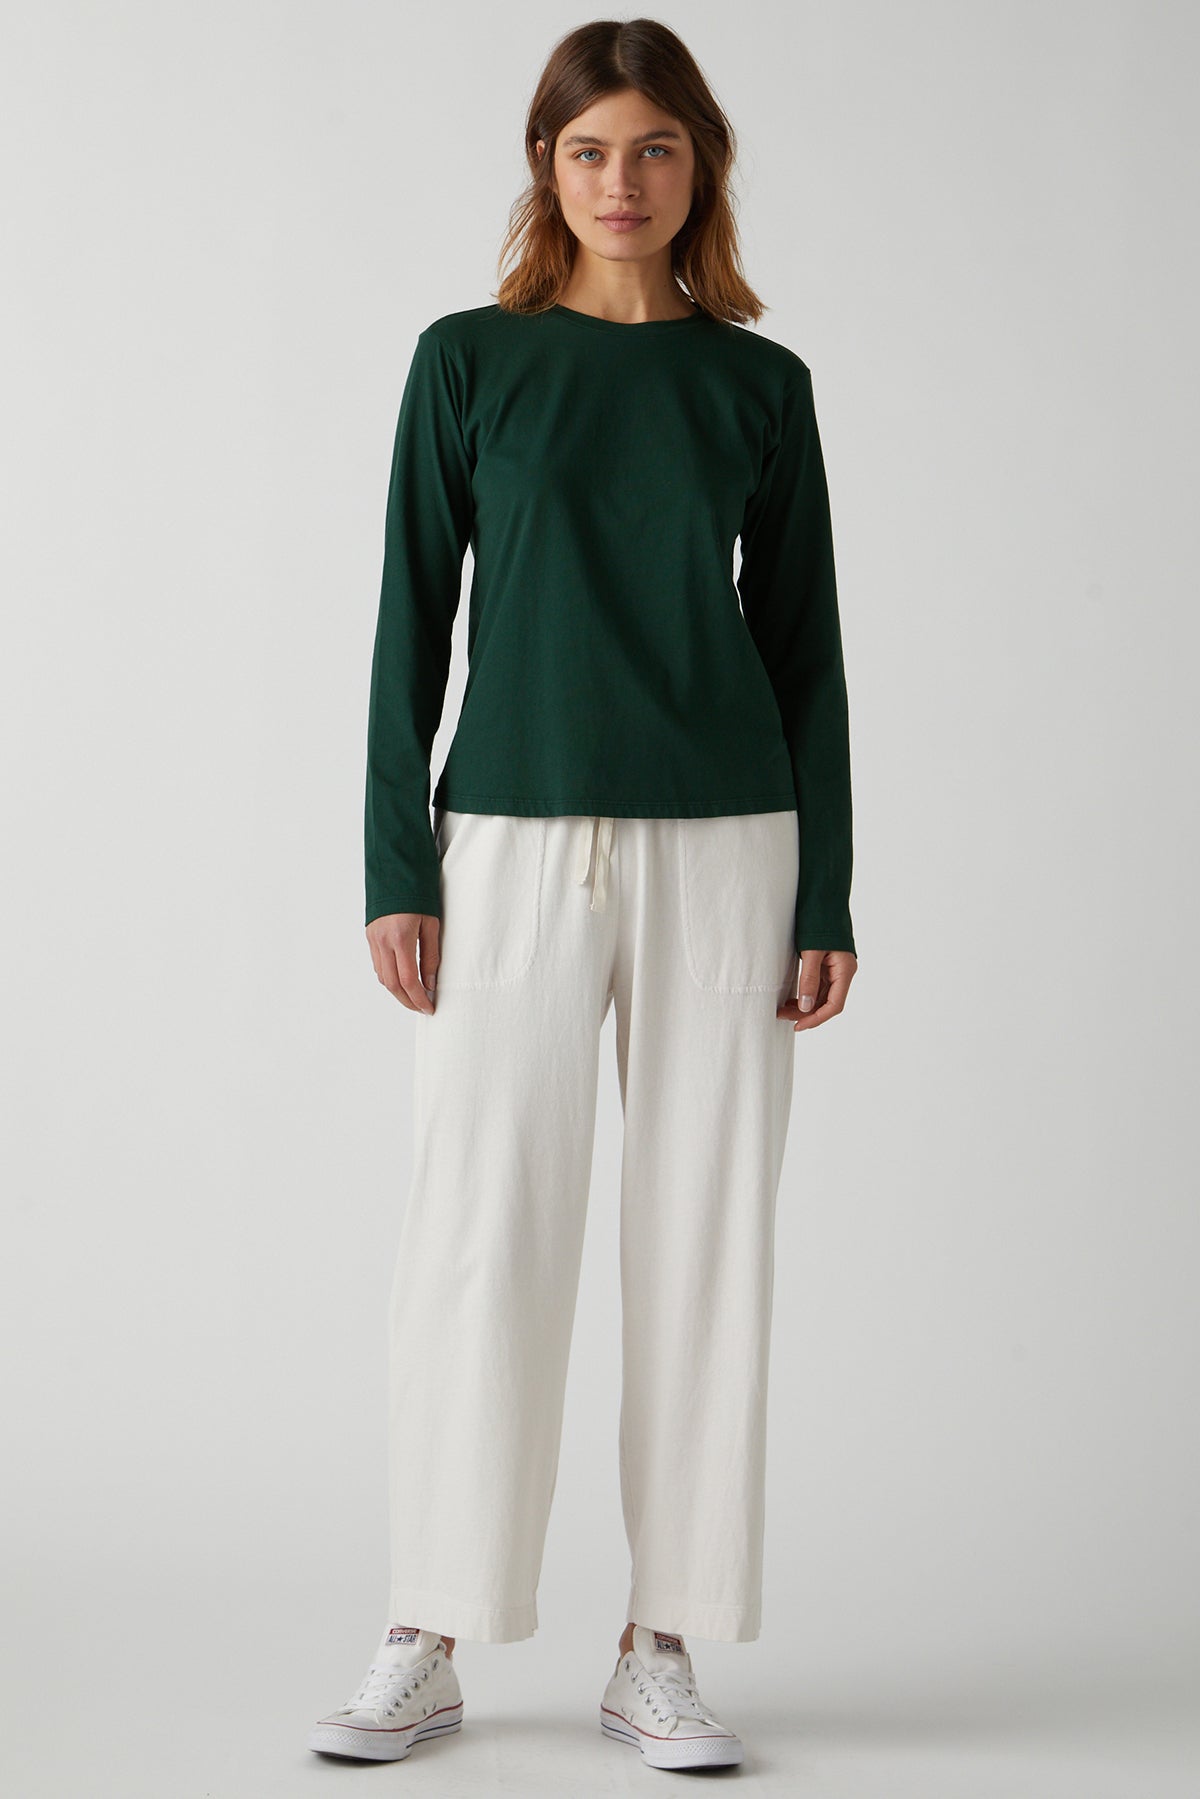 Vicente Tee in forest green with Pismo Pant in beach full length front-25484347113665